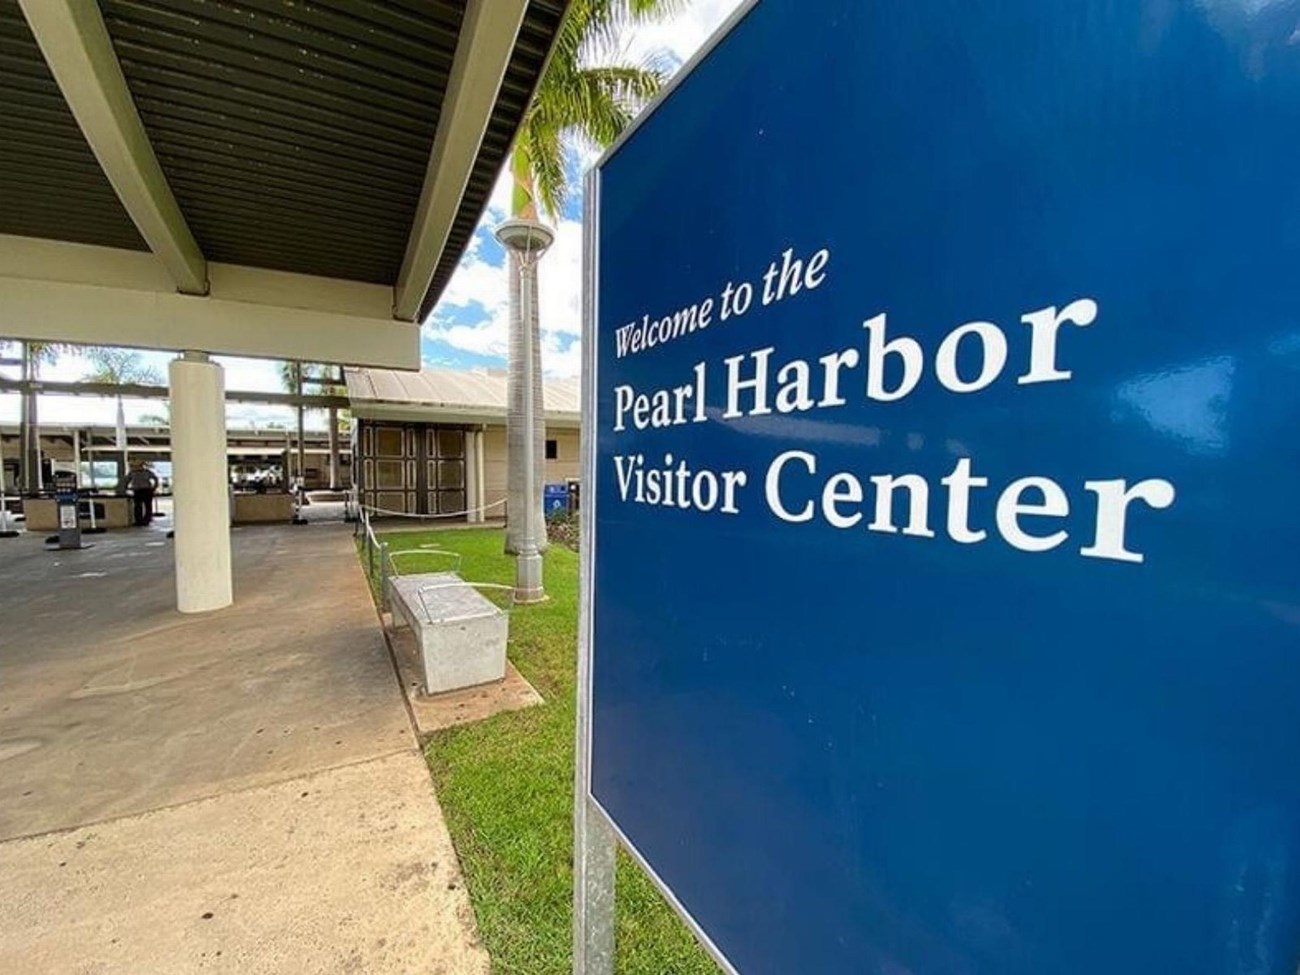 Plan your visit to Pearl Harbor